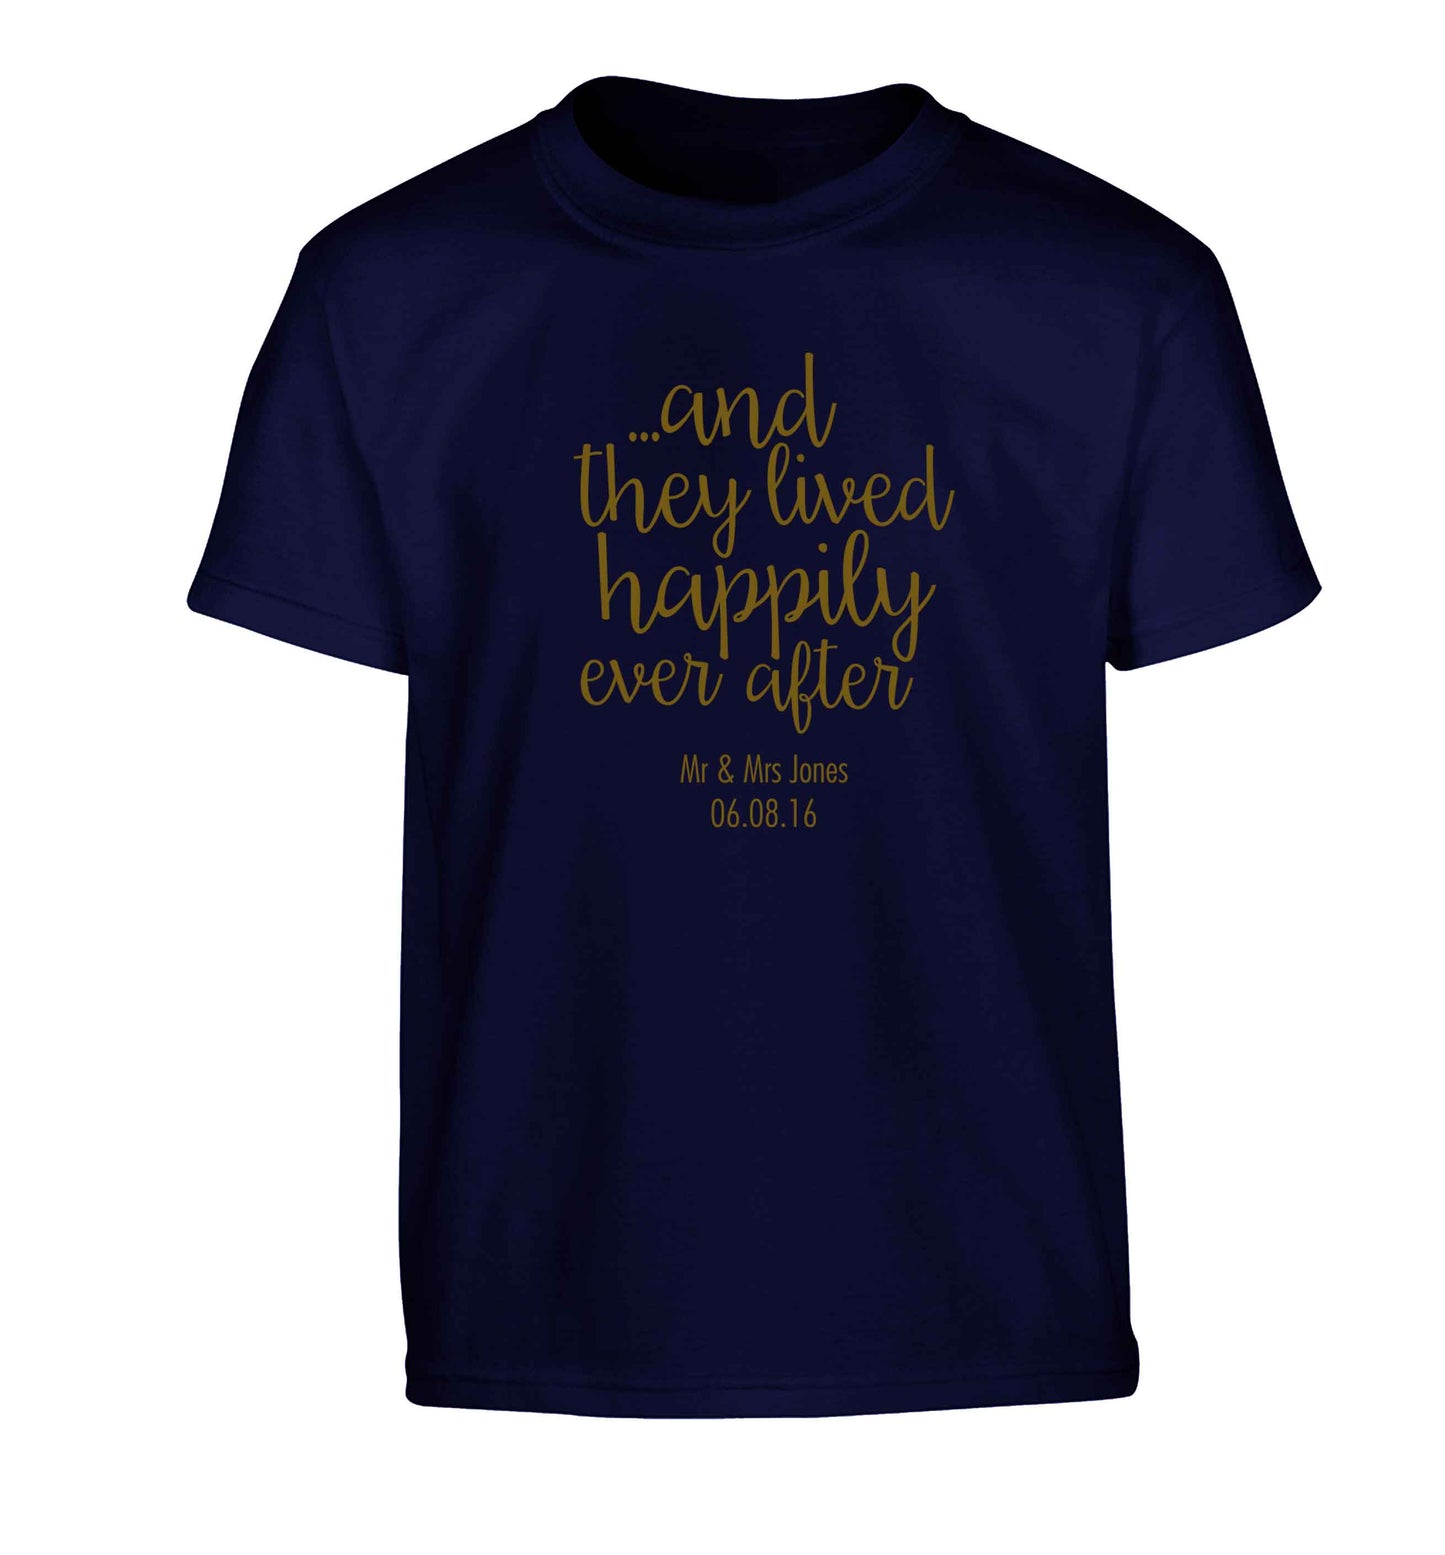 ...and they lived happily ever after - personalised date and names Children's navy Tshirt 12-13 Years